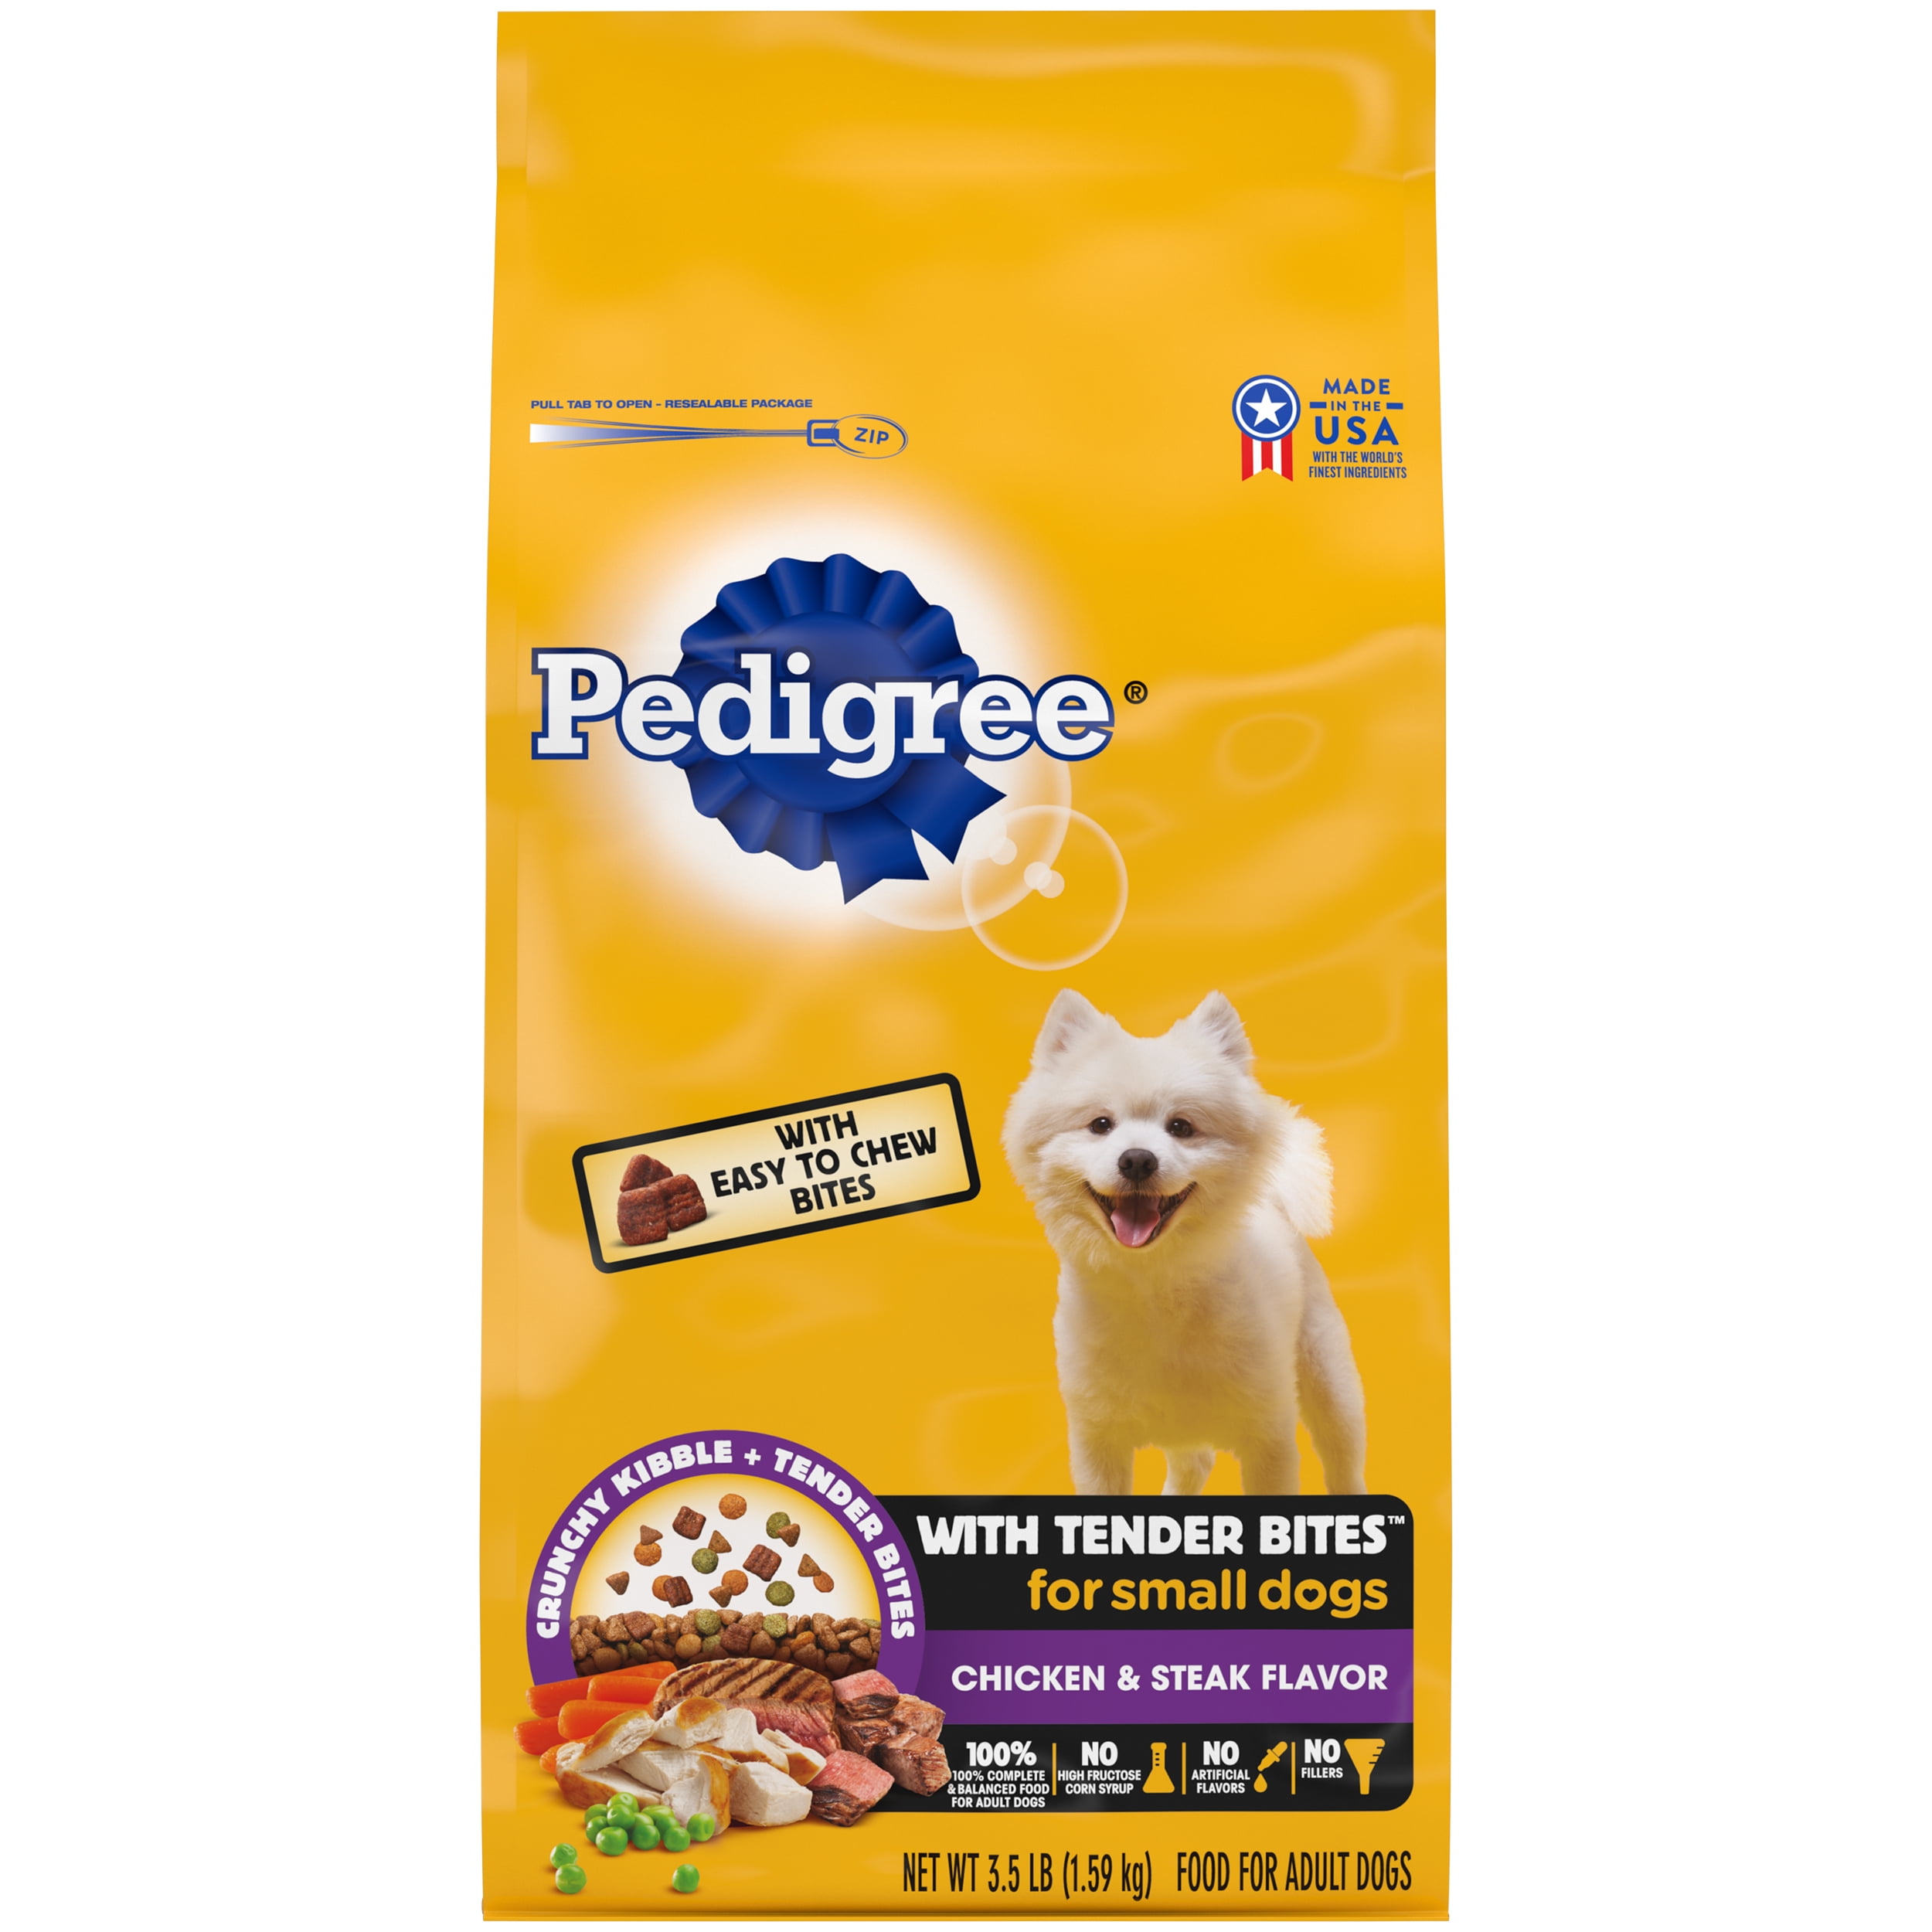 Pedigree with Tender Bites for Small Dogs, Complete India | Ubuy